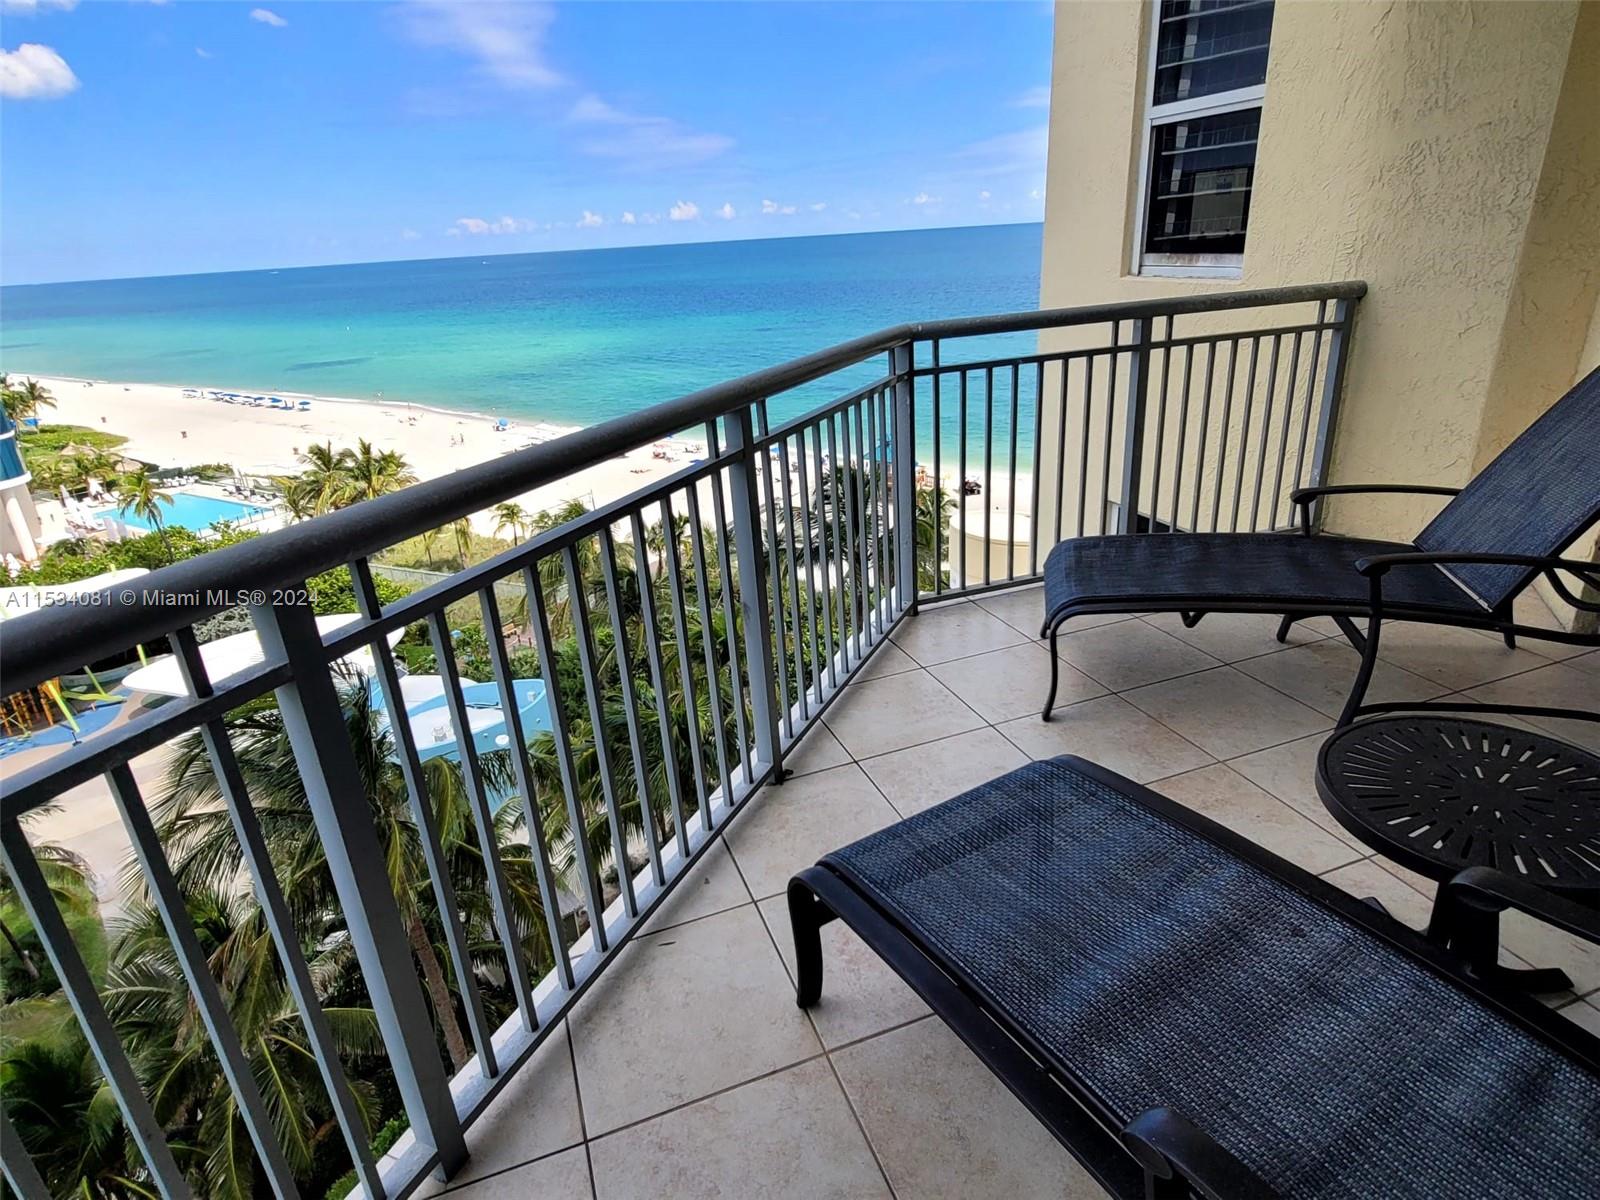 Property for Sale at 17375 Collins Ave 1007, Sunny Isles Beach, Miami-Dade County, Florida - Bedrooms: 2 
Bathrooms: 2  - $845,500